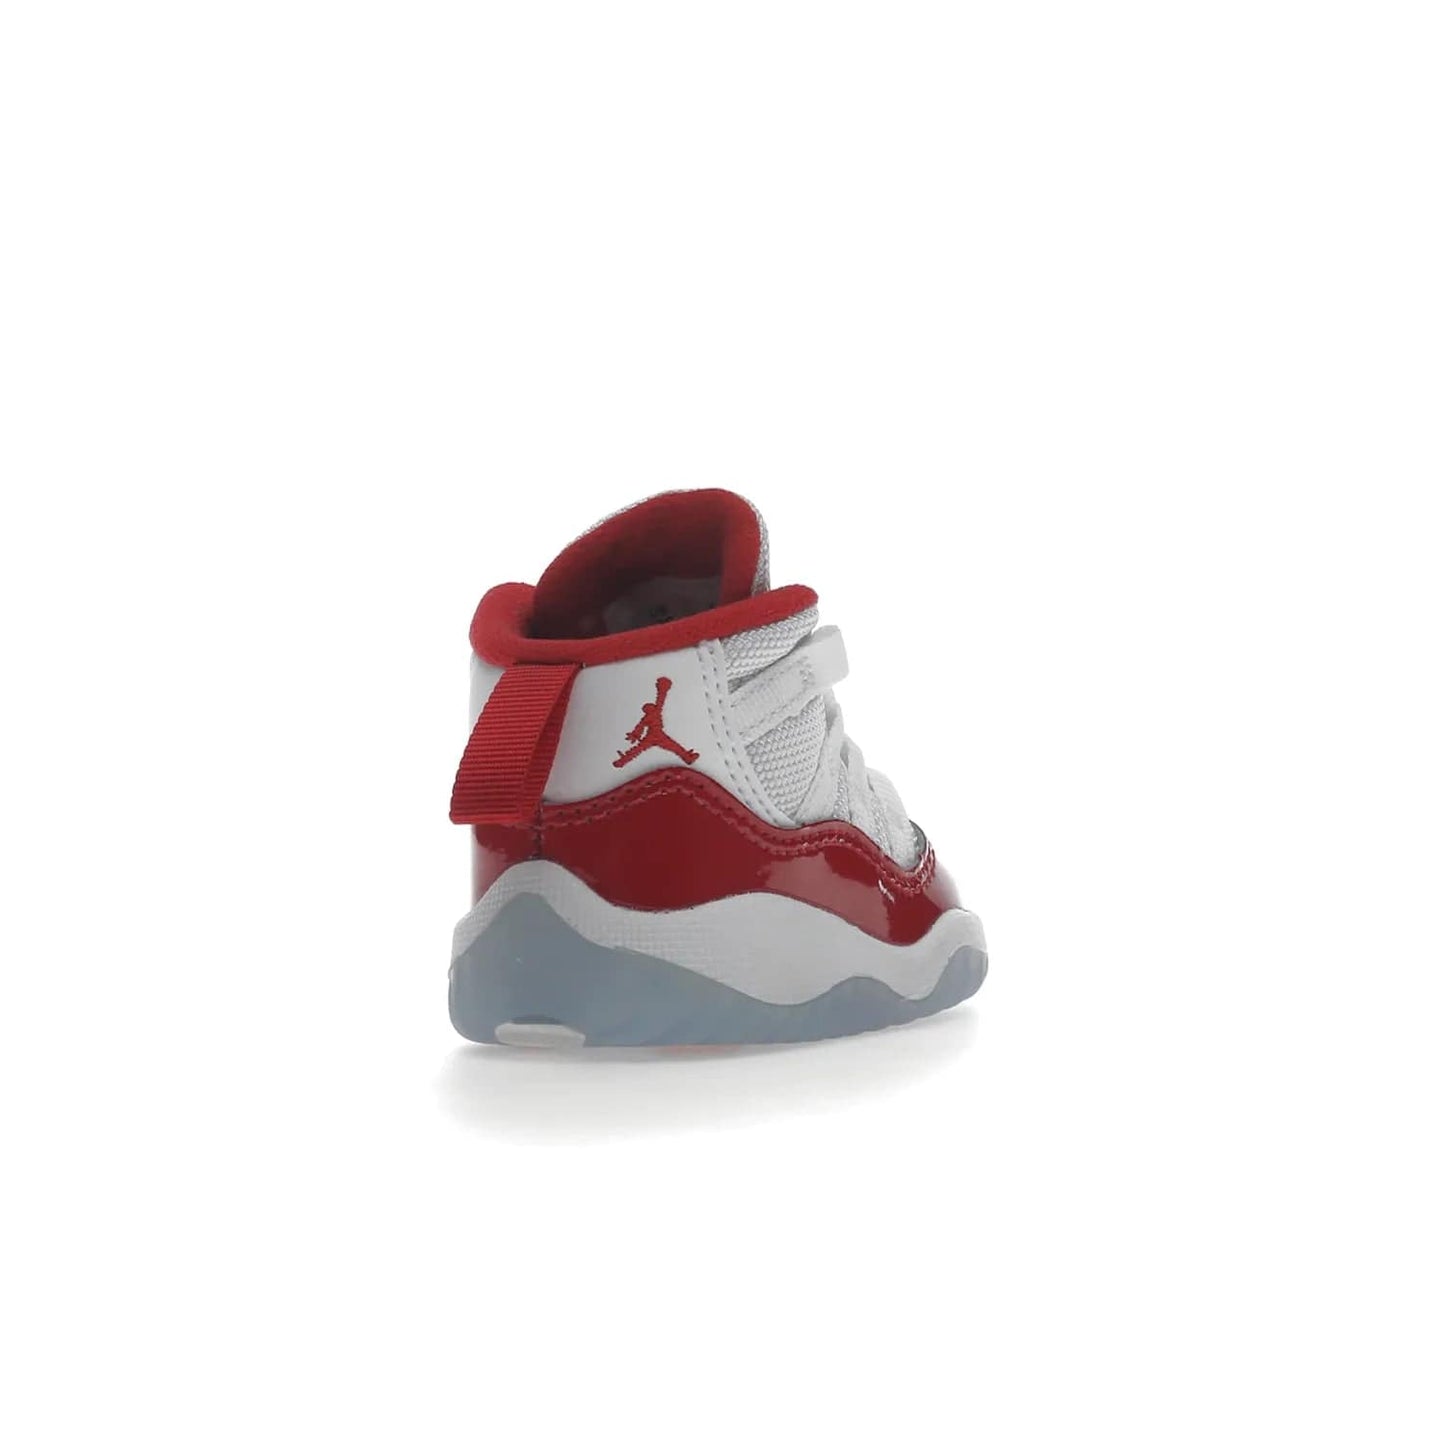 Jordan 11 Retro Cherry (2022) (TD) - Image 31 - Only at www.BallersClubKickz.com - Timeless classic. Air Jordan 11 Retro Cherry 2022 TD combines mesh, leather & suede for a unique look. White upper with varsity red suede. Jumpman logo on collar & tongue. Available Dec 10th, priced at $80.